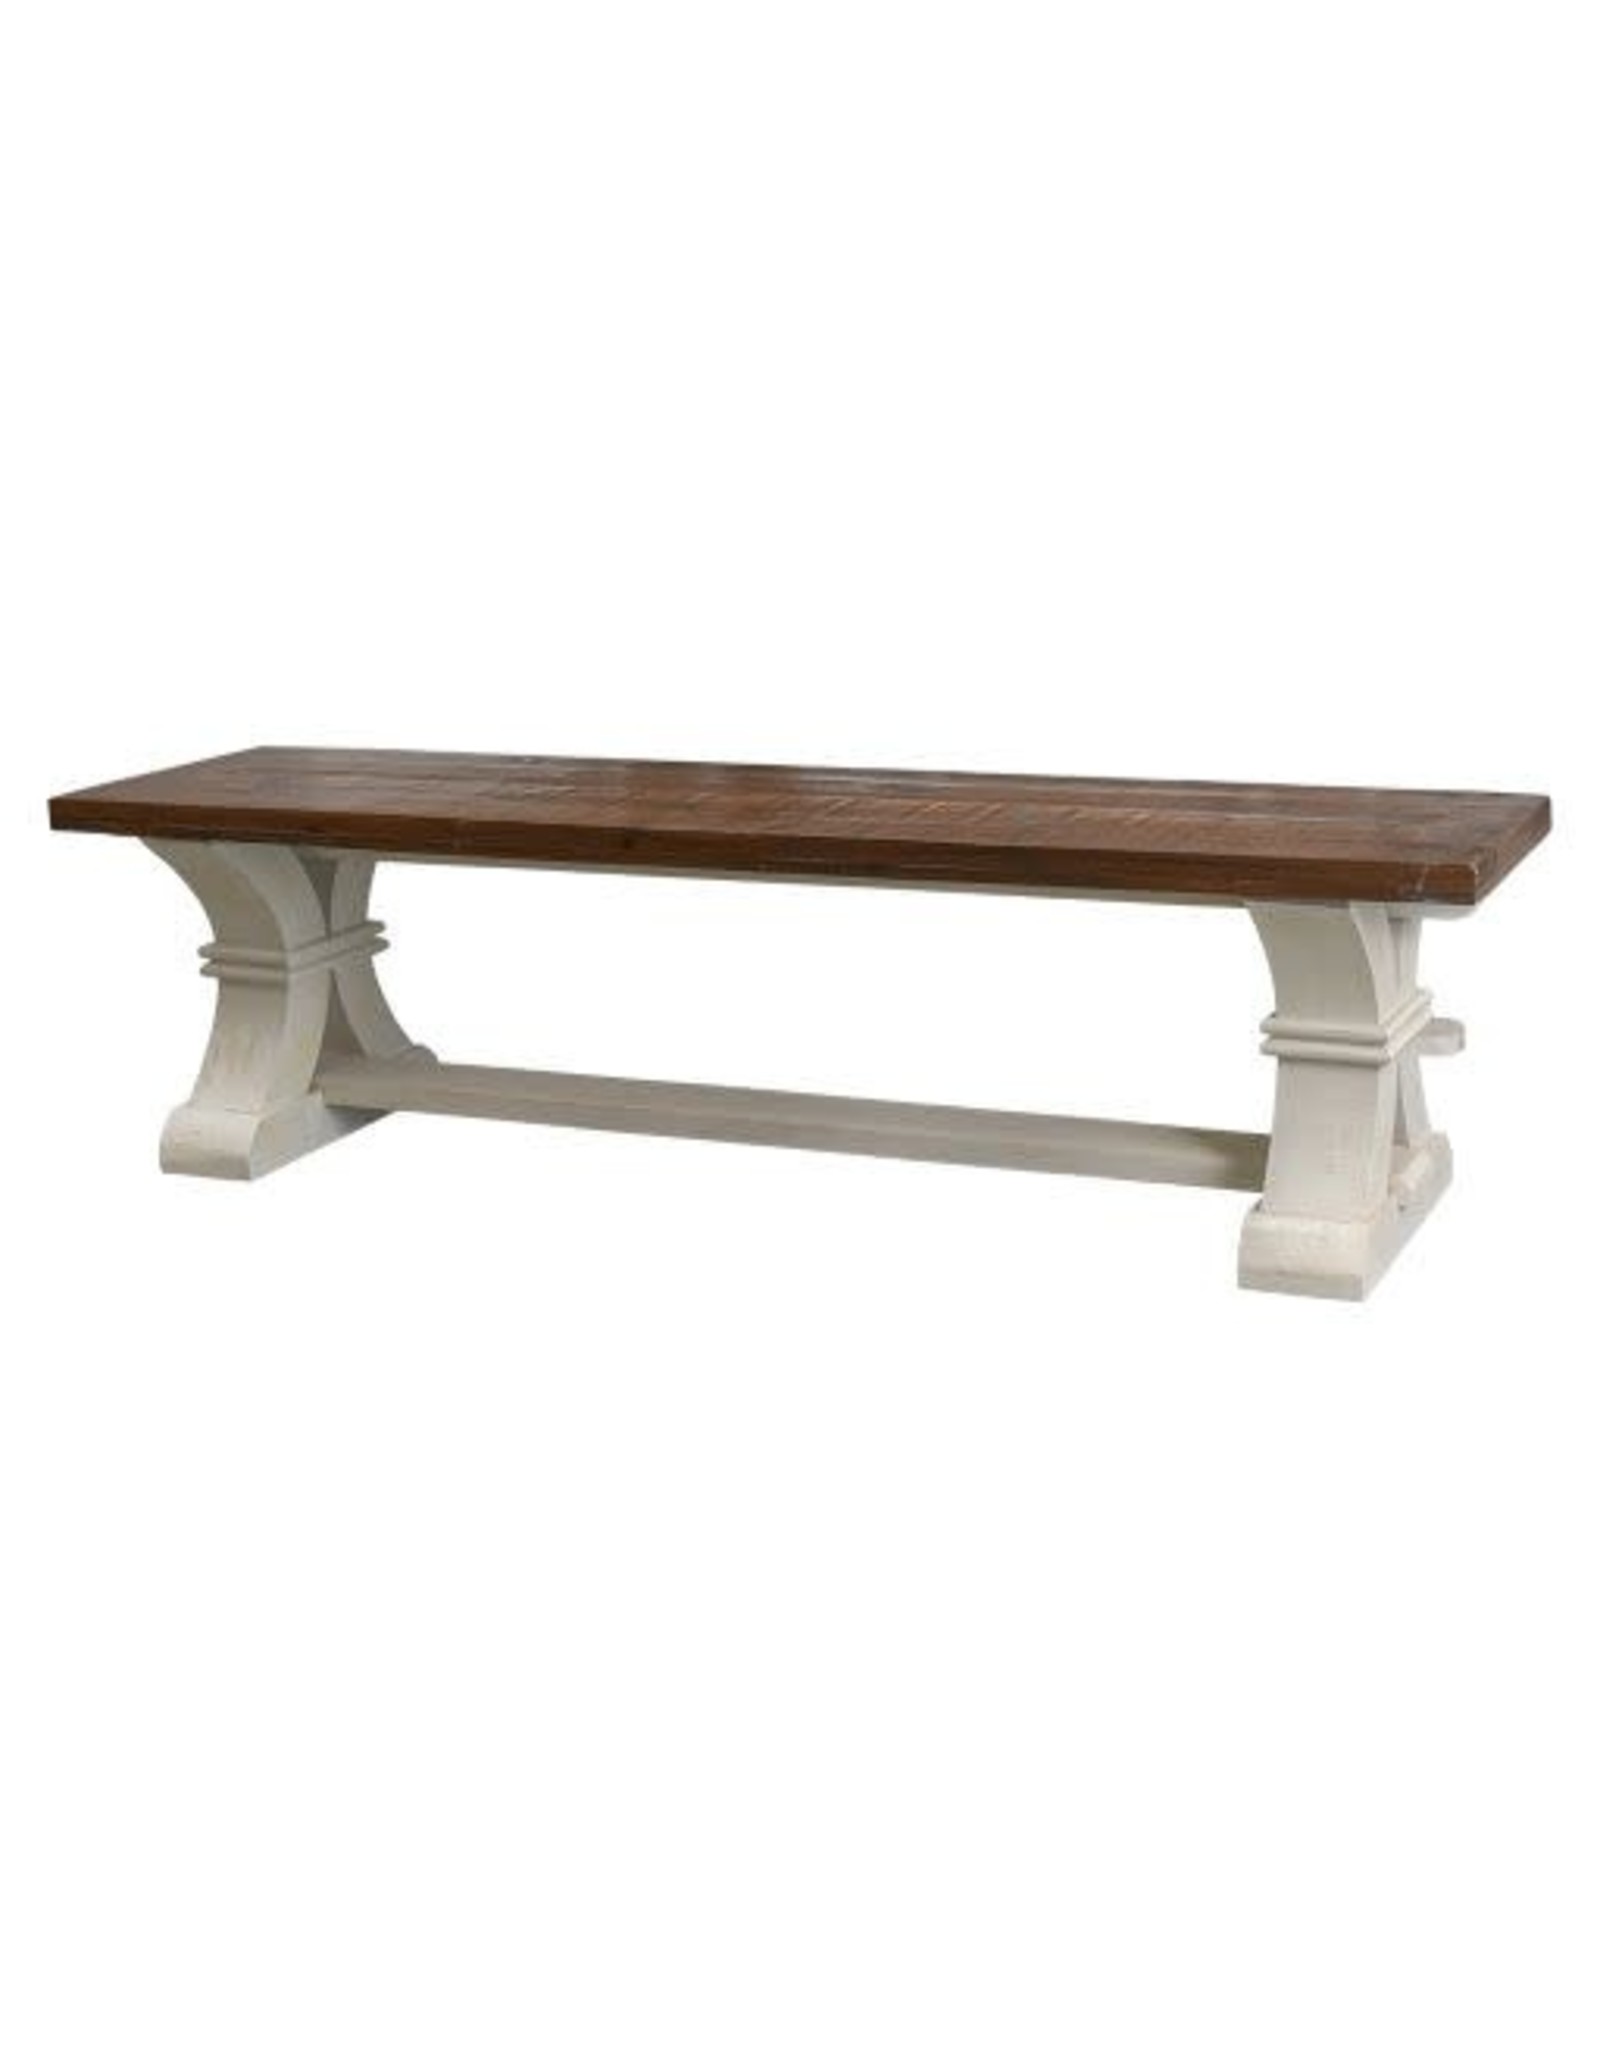 BAN 120-6-HO 6' LENOX TRESTLE BENCH WHT/TO TOP 72 × 16 × 20 in